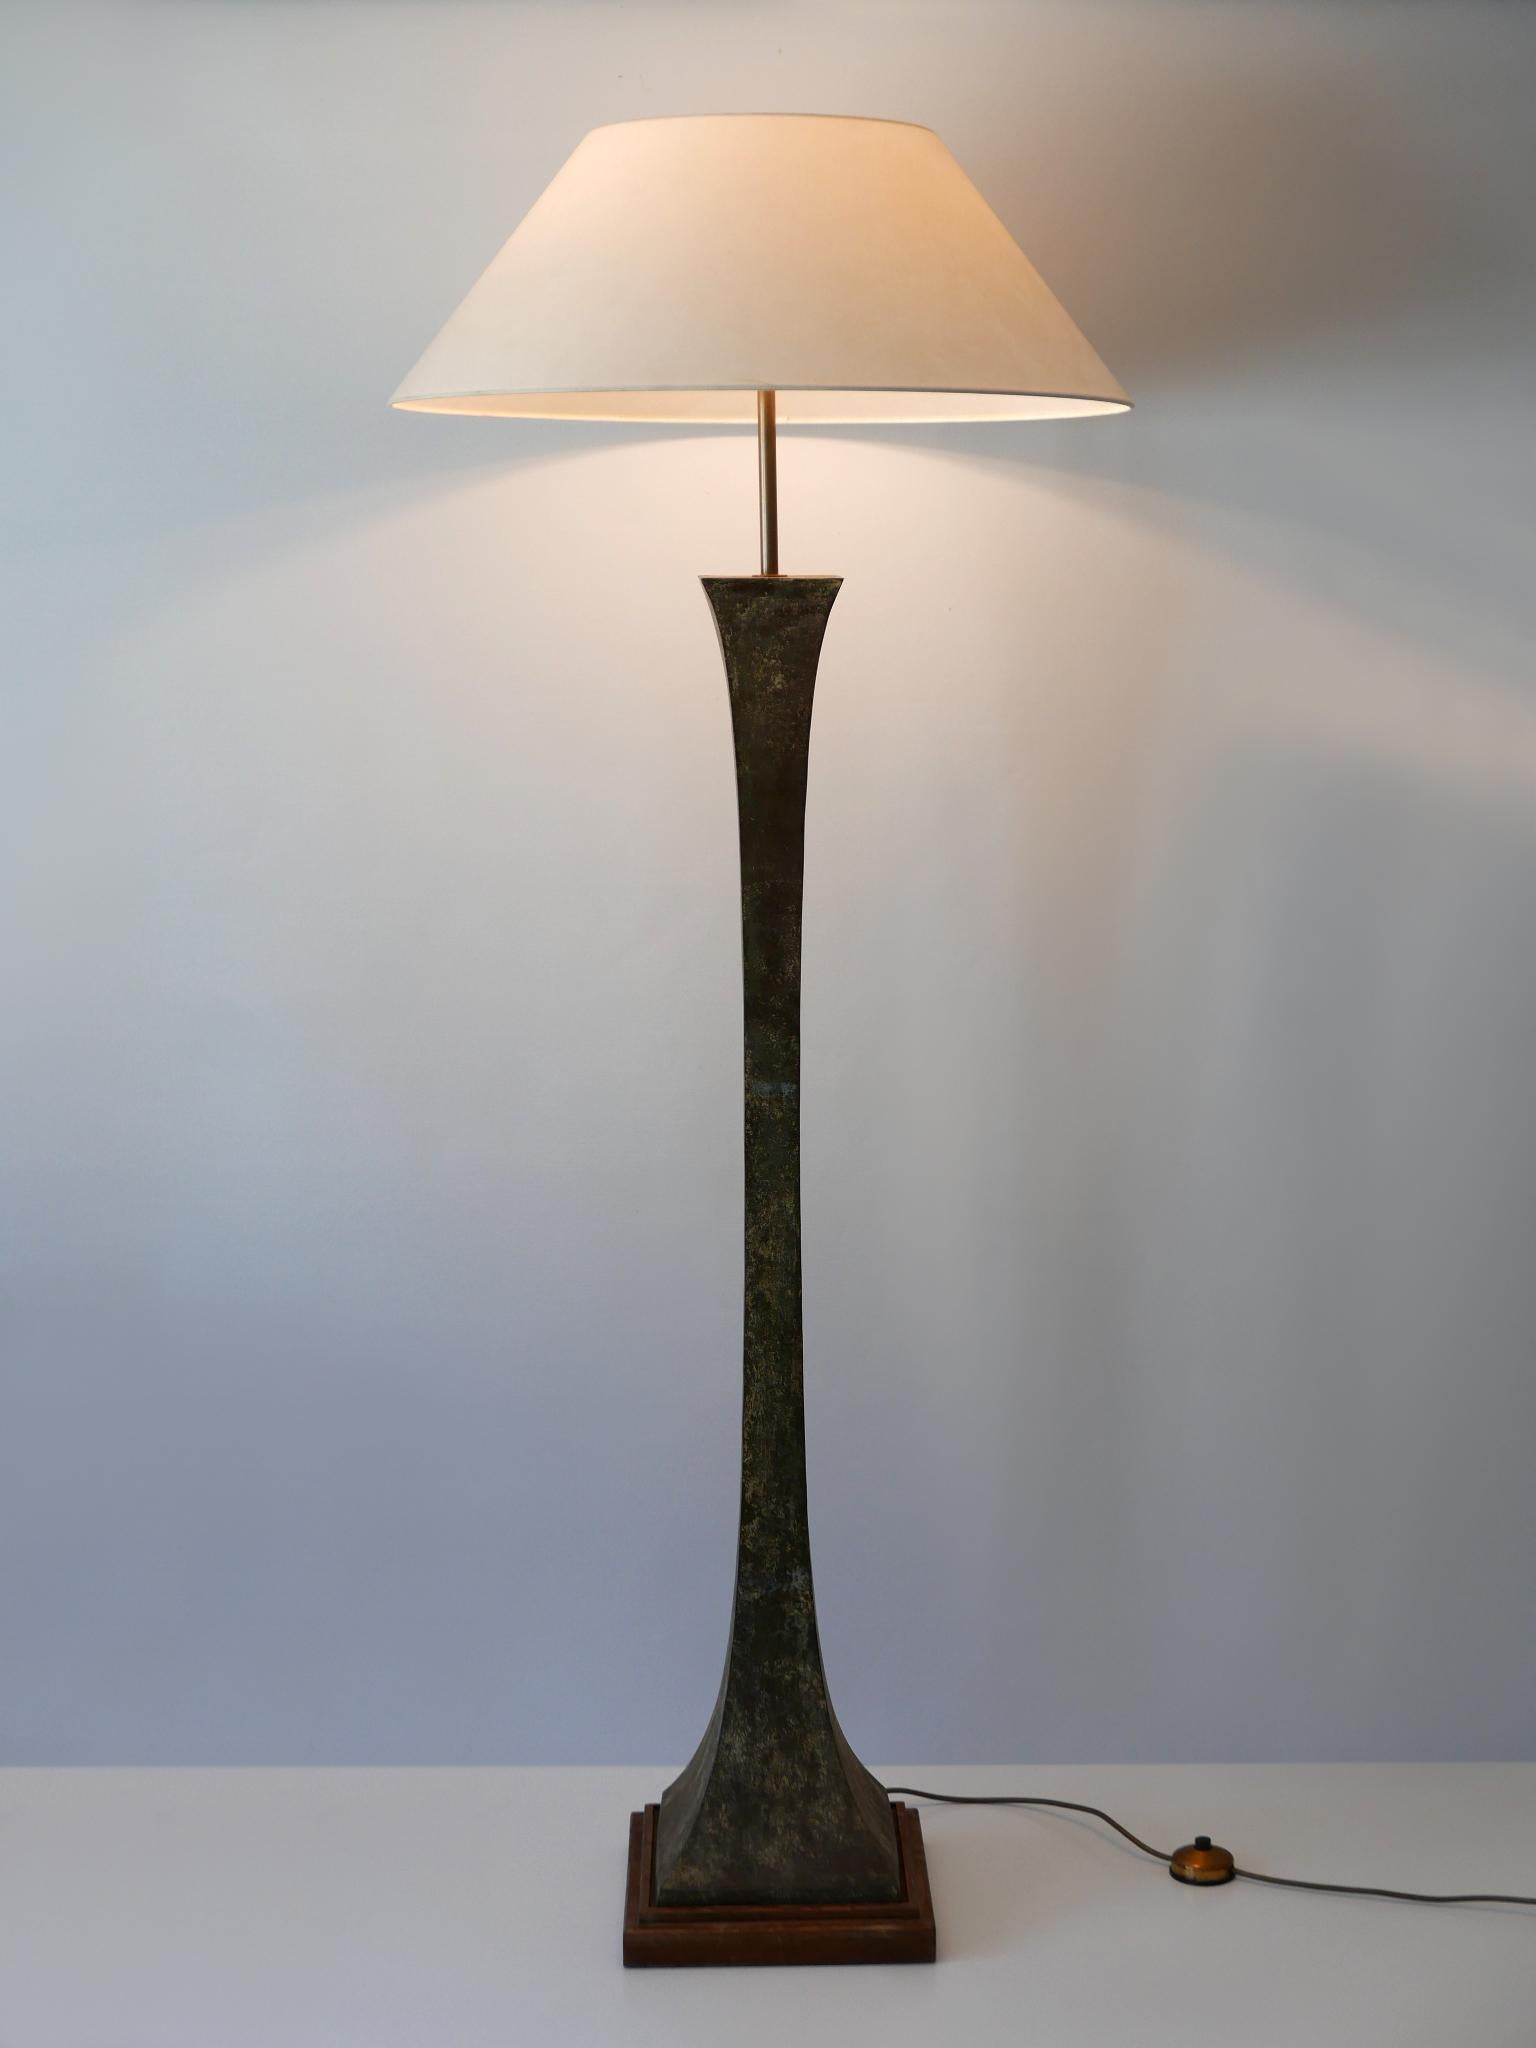 Monumental and elegant Mid-Century Modern bronze verdigris floor lamp. Designed by Stewart Ross James and manufactured by Hansen Lighting, New York, USA, 1960s.

Executed in verdigris bronze, brass and wood; the floor lamp comes with 2 x E27 / E26